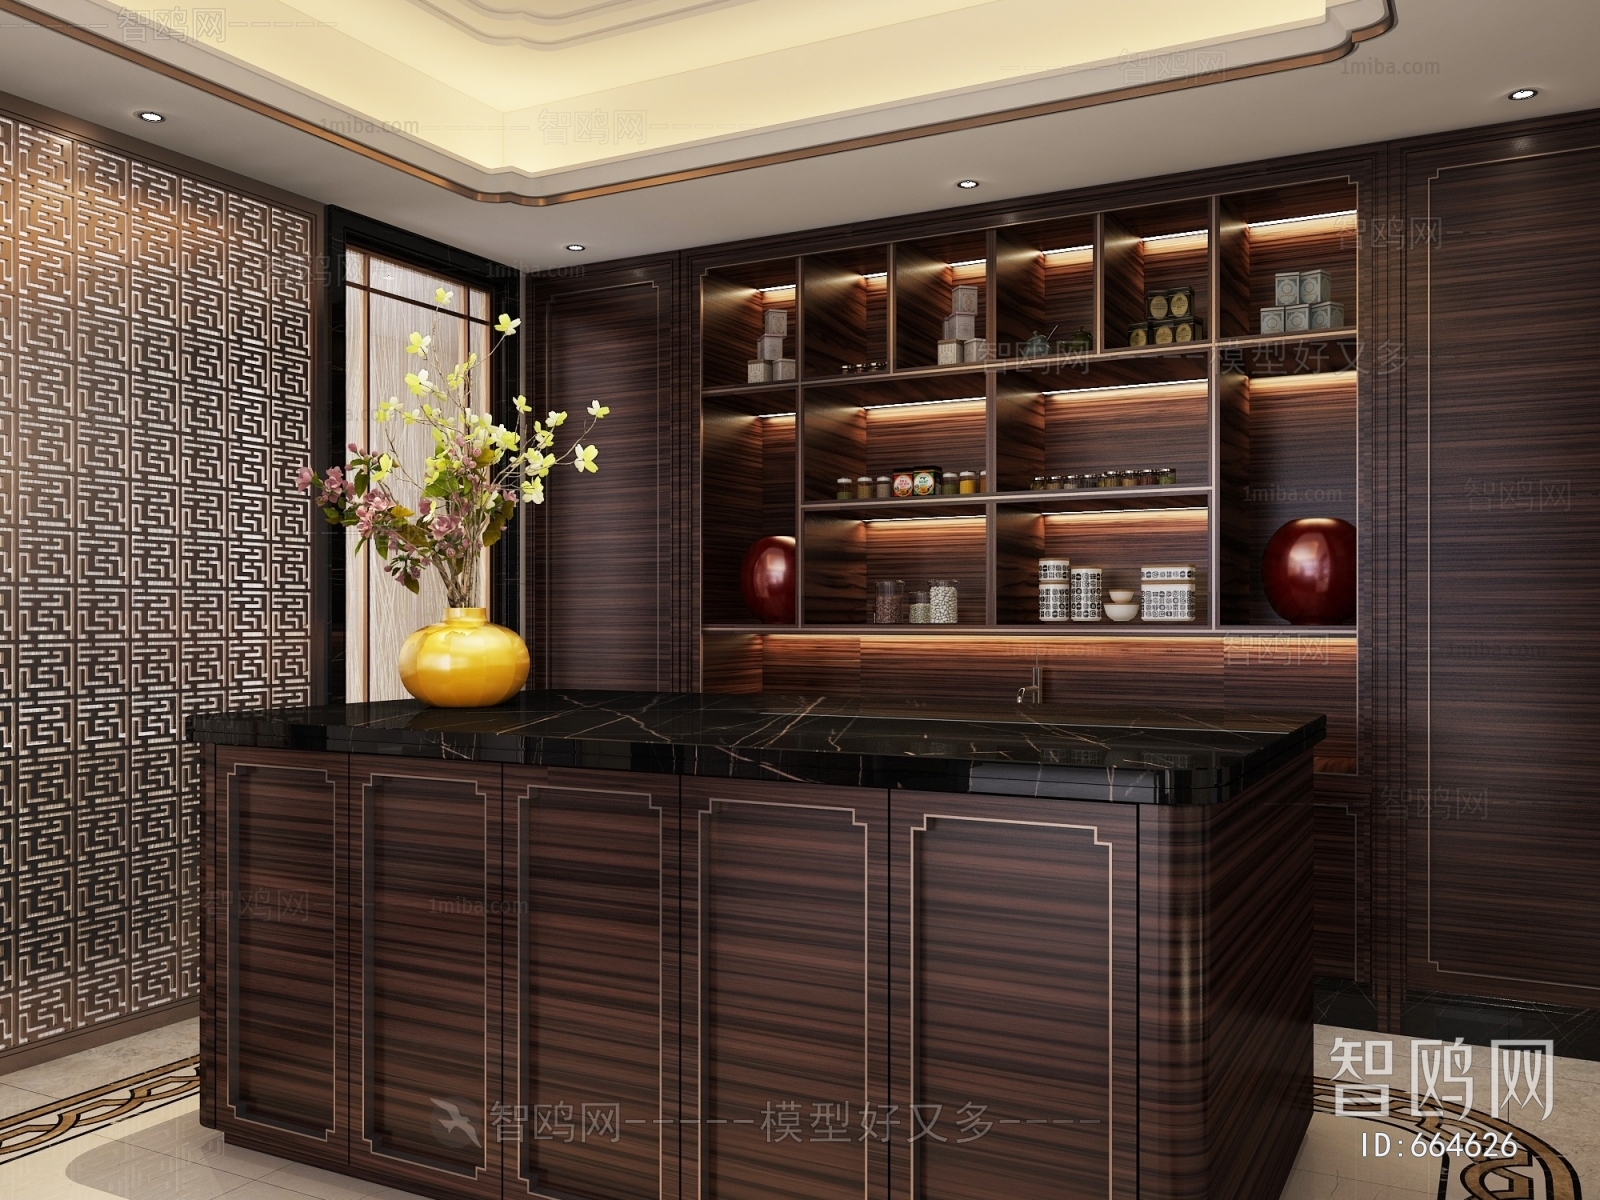 Chinese Style Kitchen Cabinet